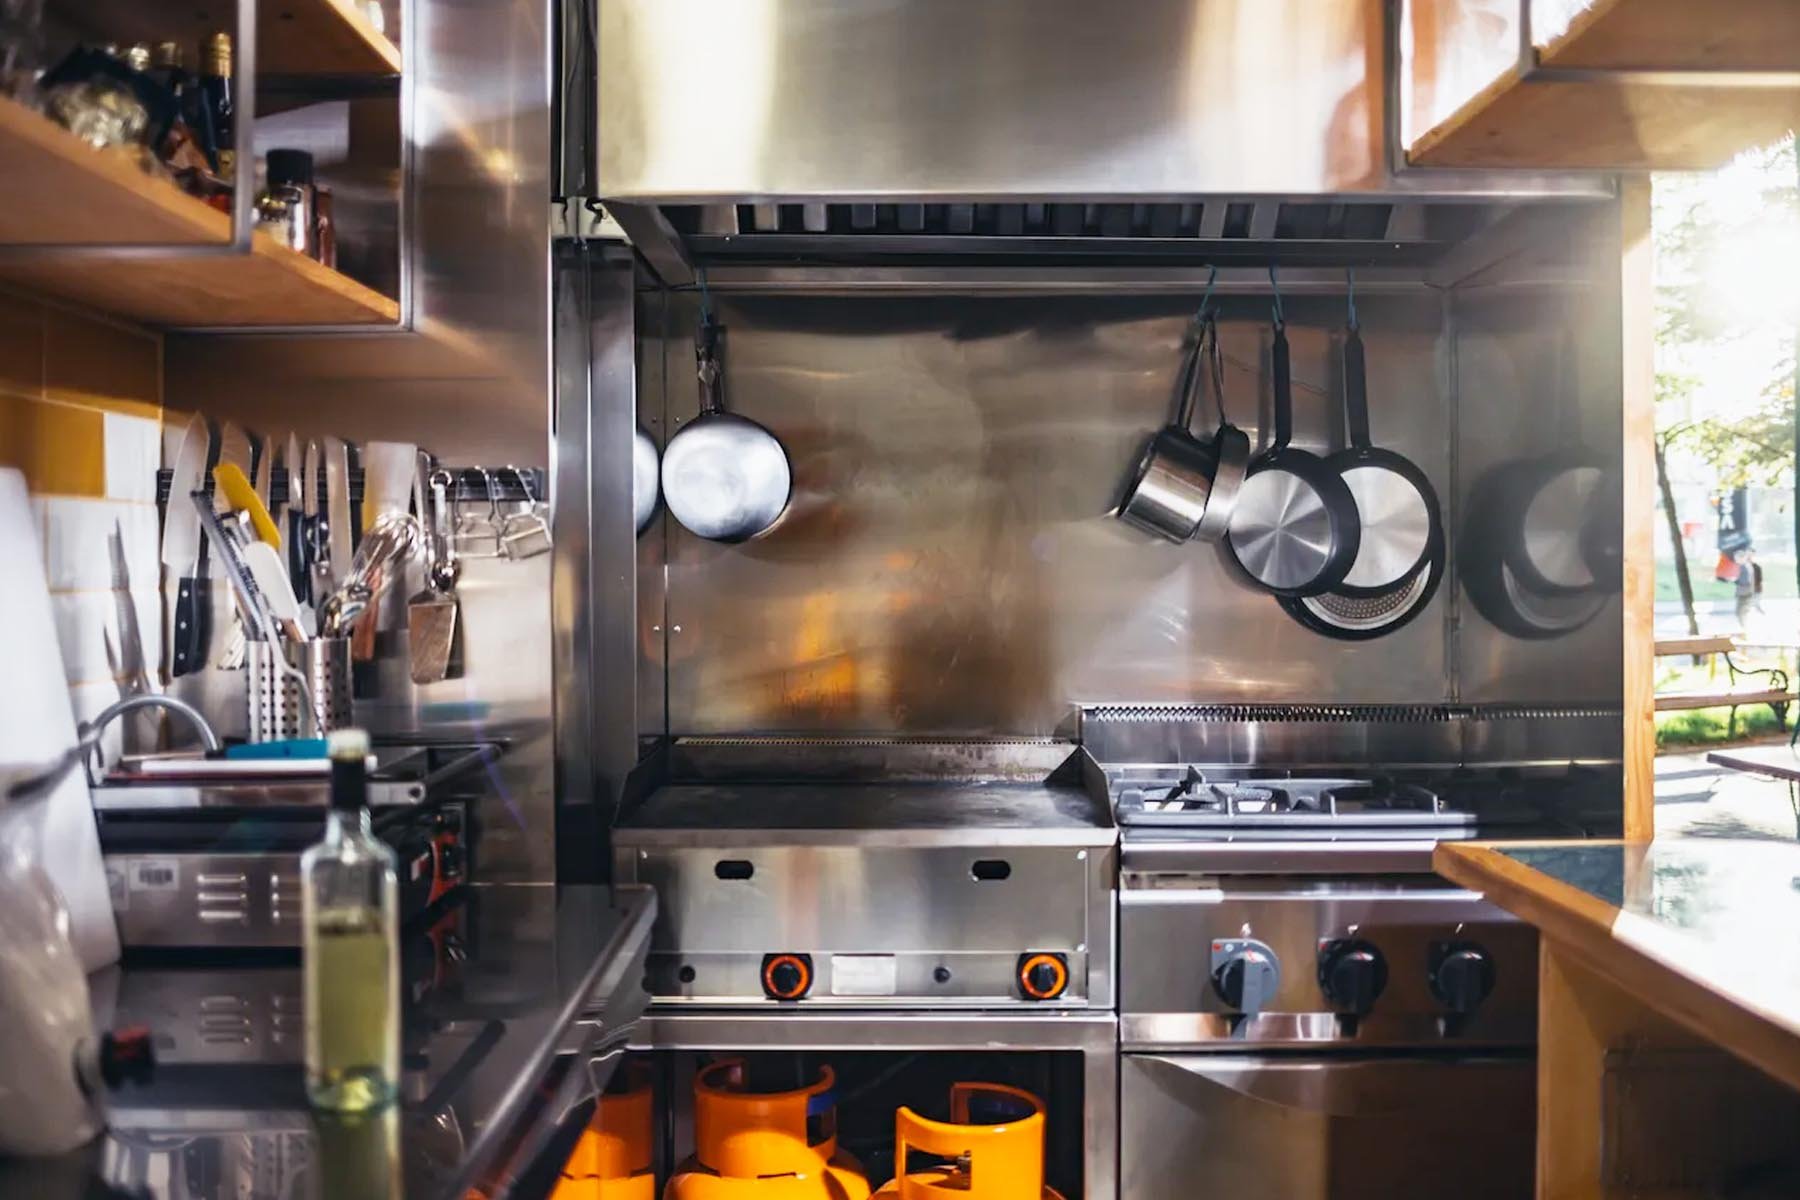 How To Make The Most of Small Kitchen Space In NYC